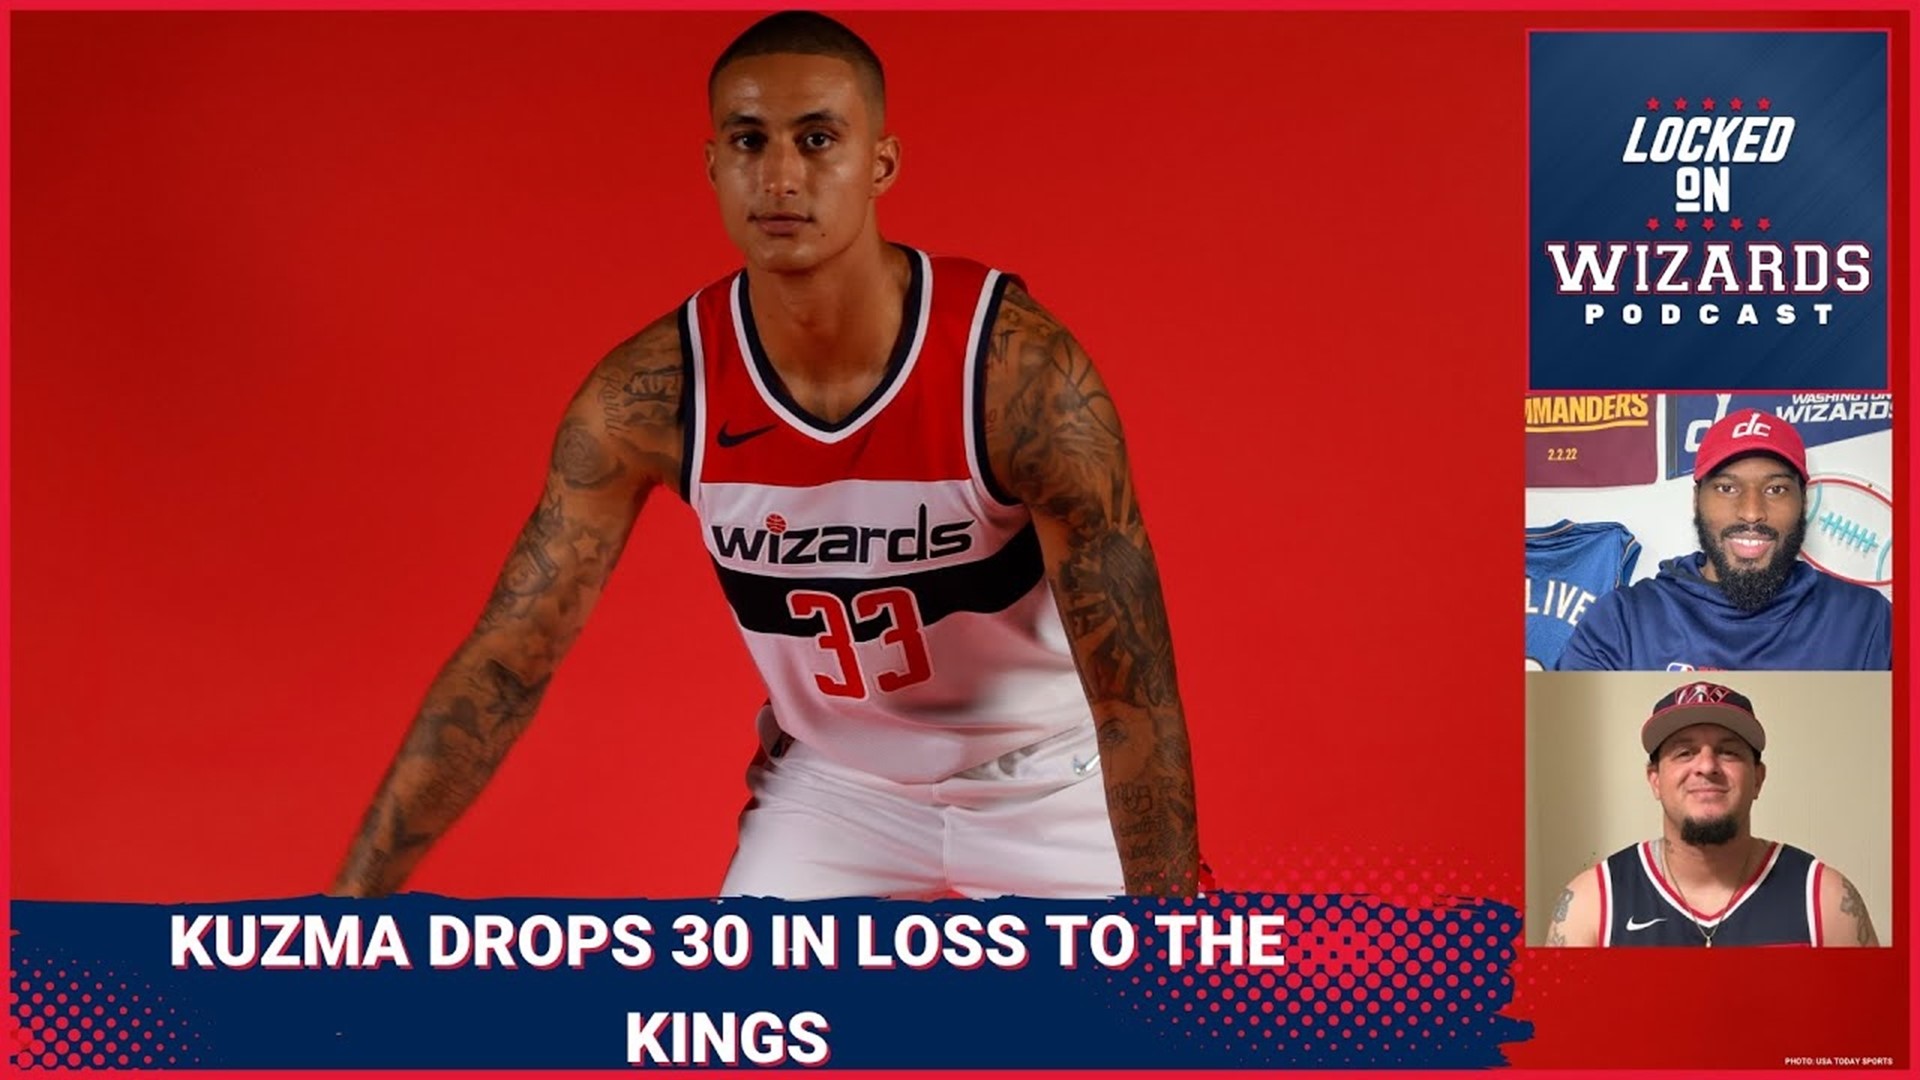 Ed & Brandon recap the Wizards loss to the Kings. The Wizards are now the 12th seed in the Eastern conference. Should the Wizards shut down the solid 3.